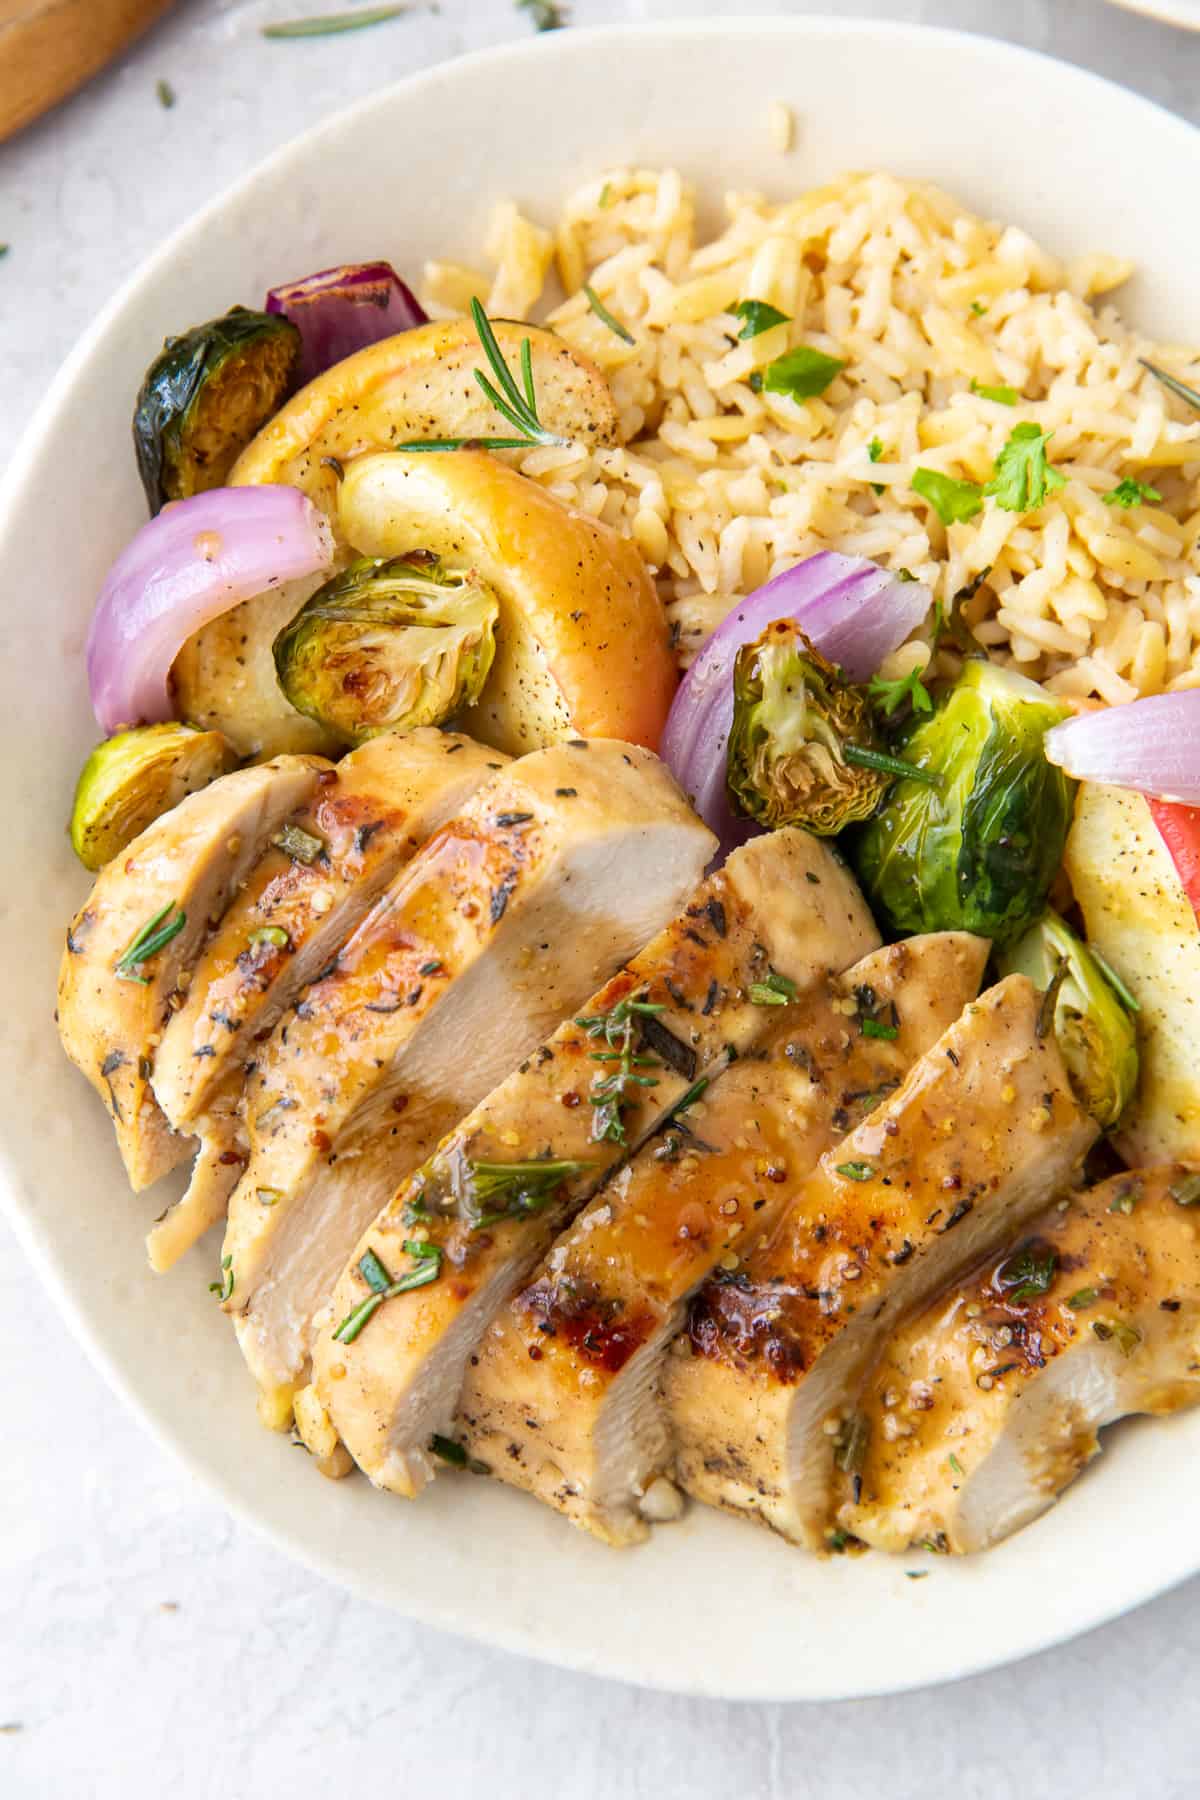 Sliced chicken with apple cider sauce in a white bowl with rice and vegetables.